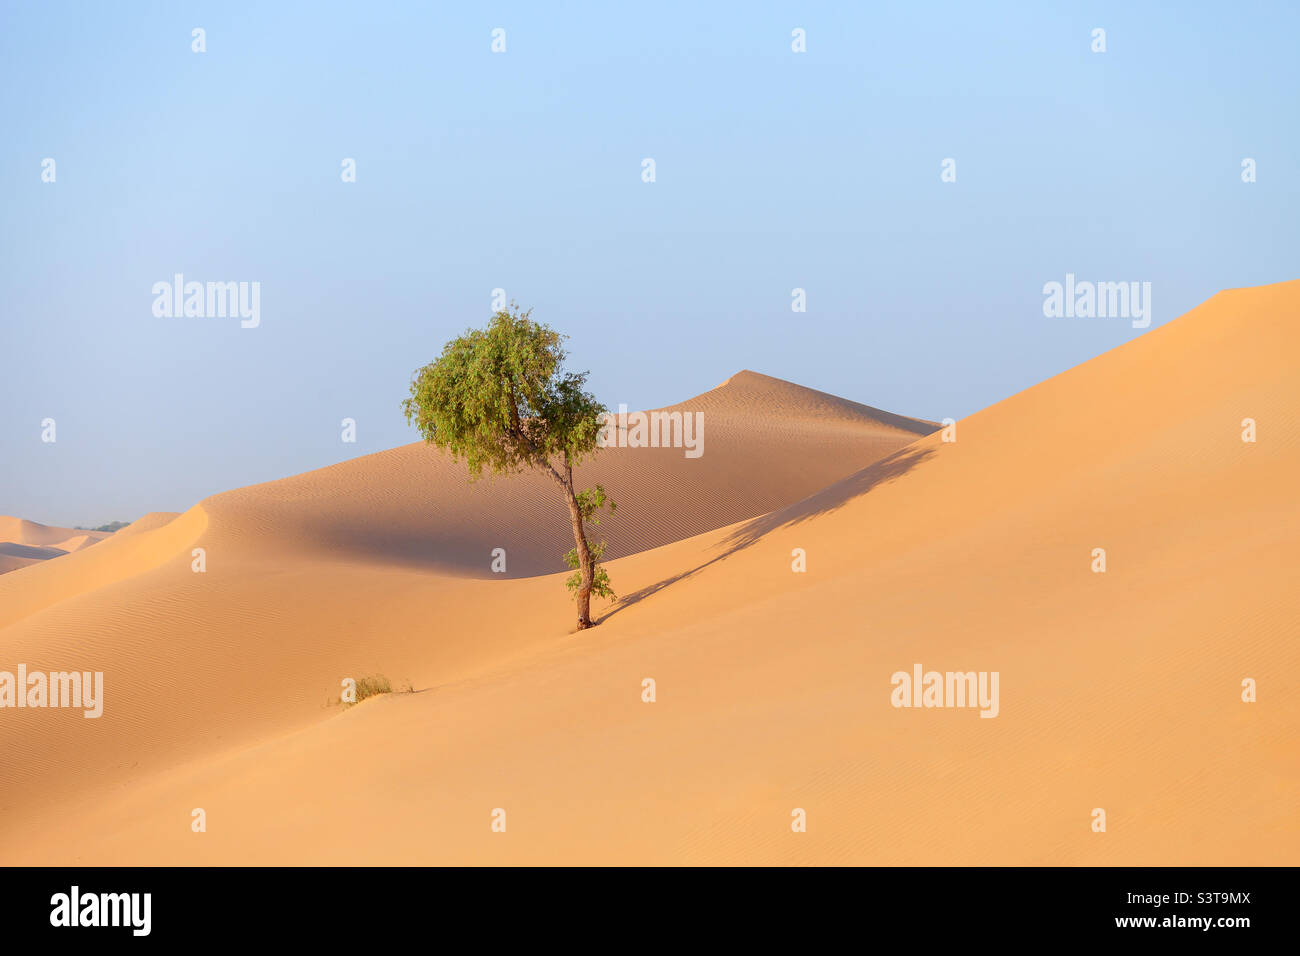 Lonely tree in the desert in Abu Dhabi in United Arab Emirates Stock Photo